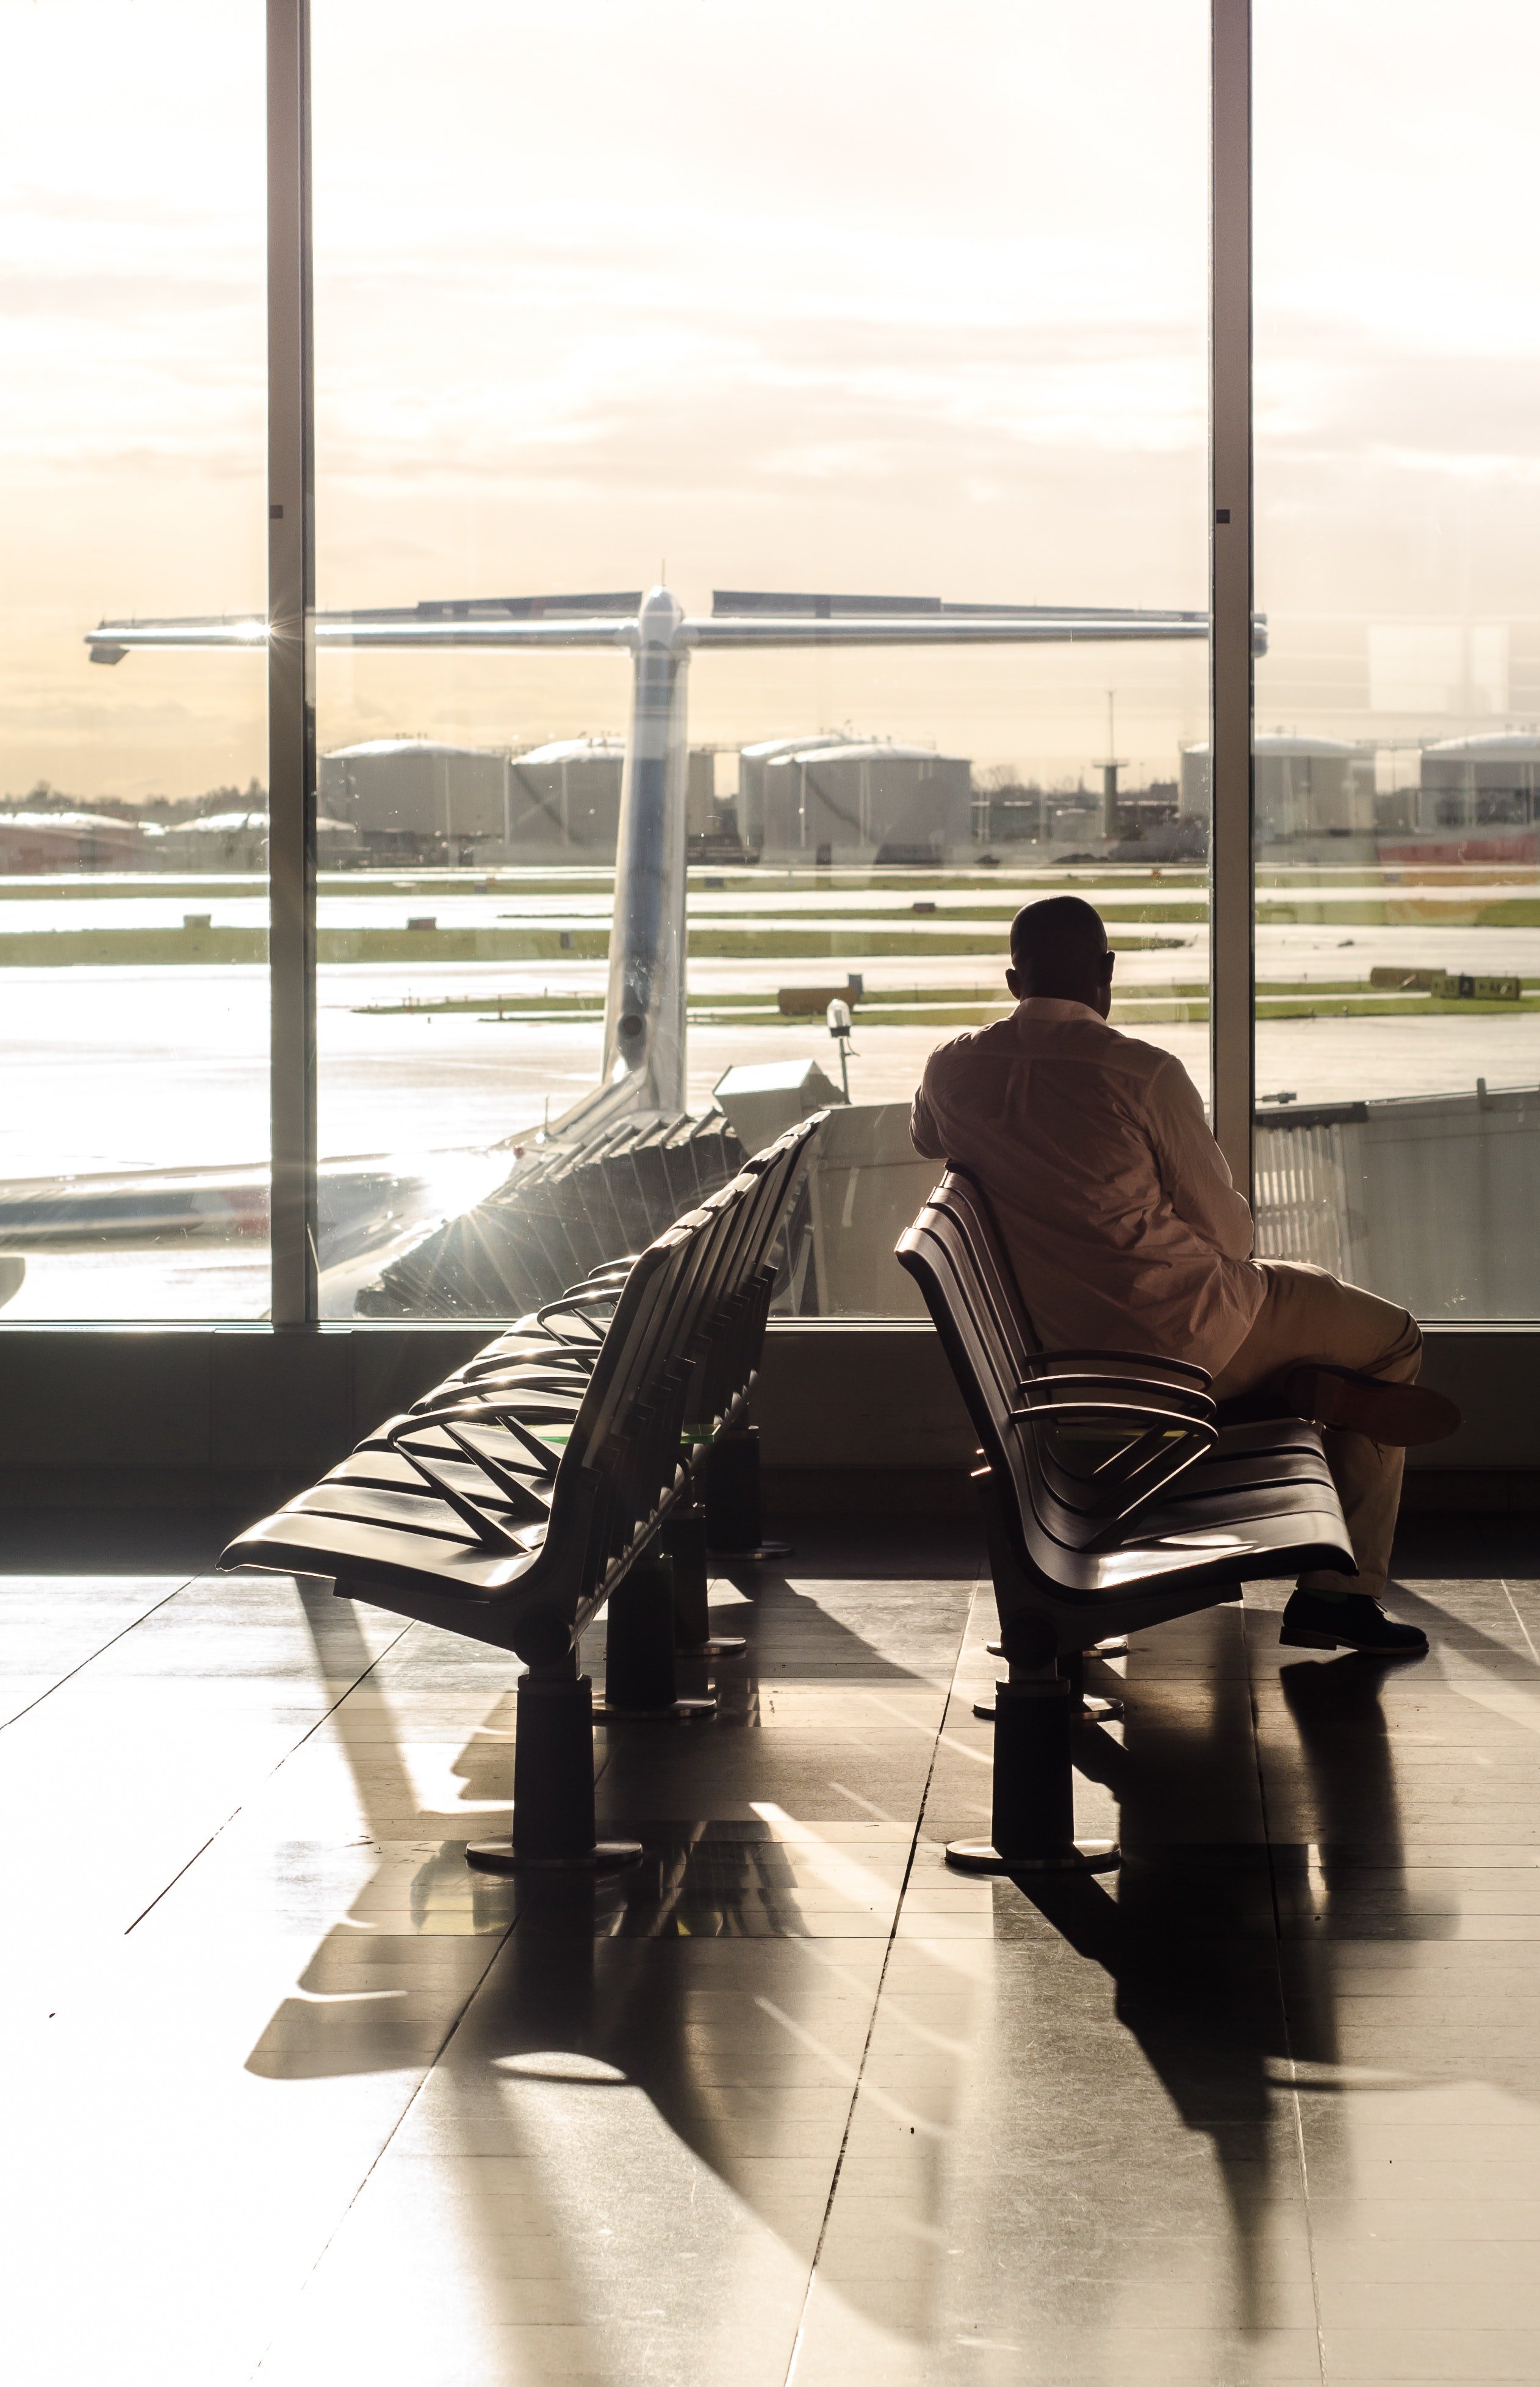 A photo of a man at the airport waiting for his flight. | Photo: Pexels